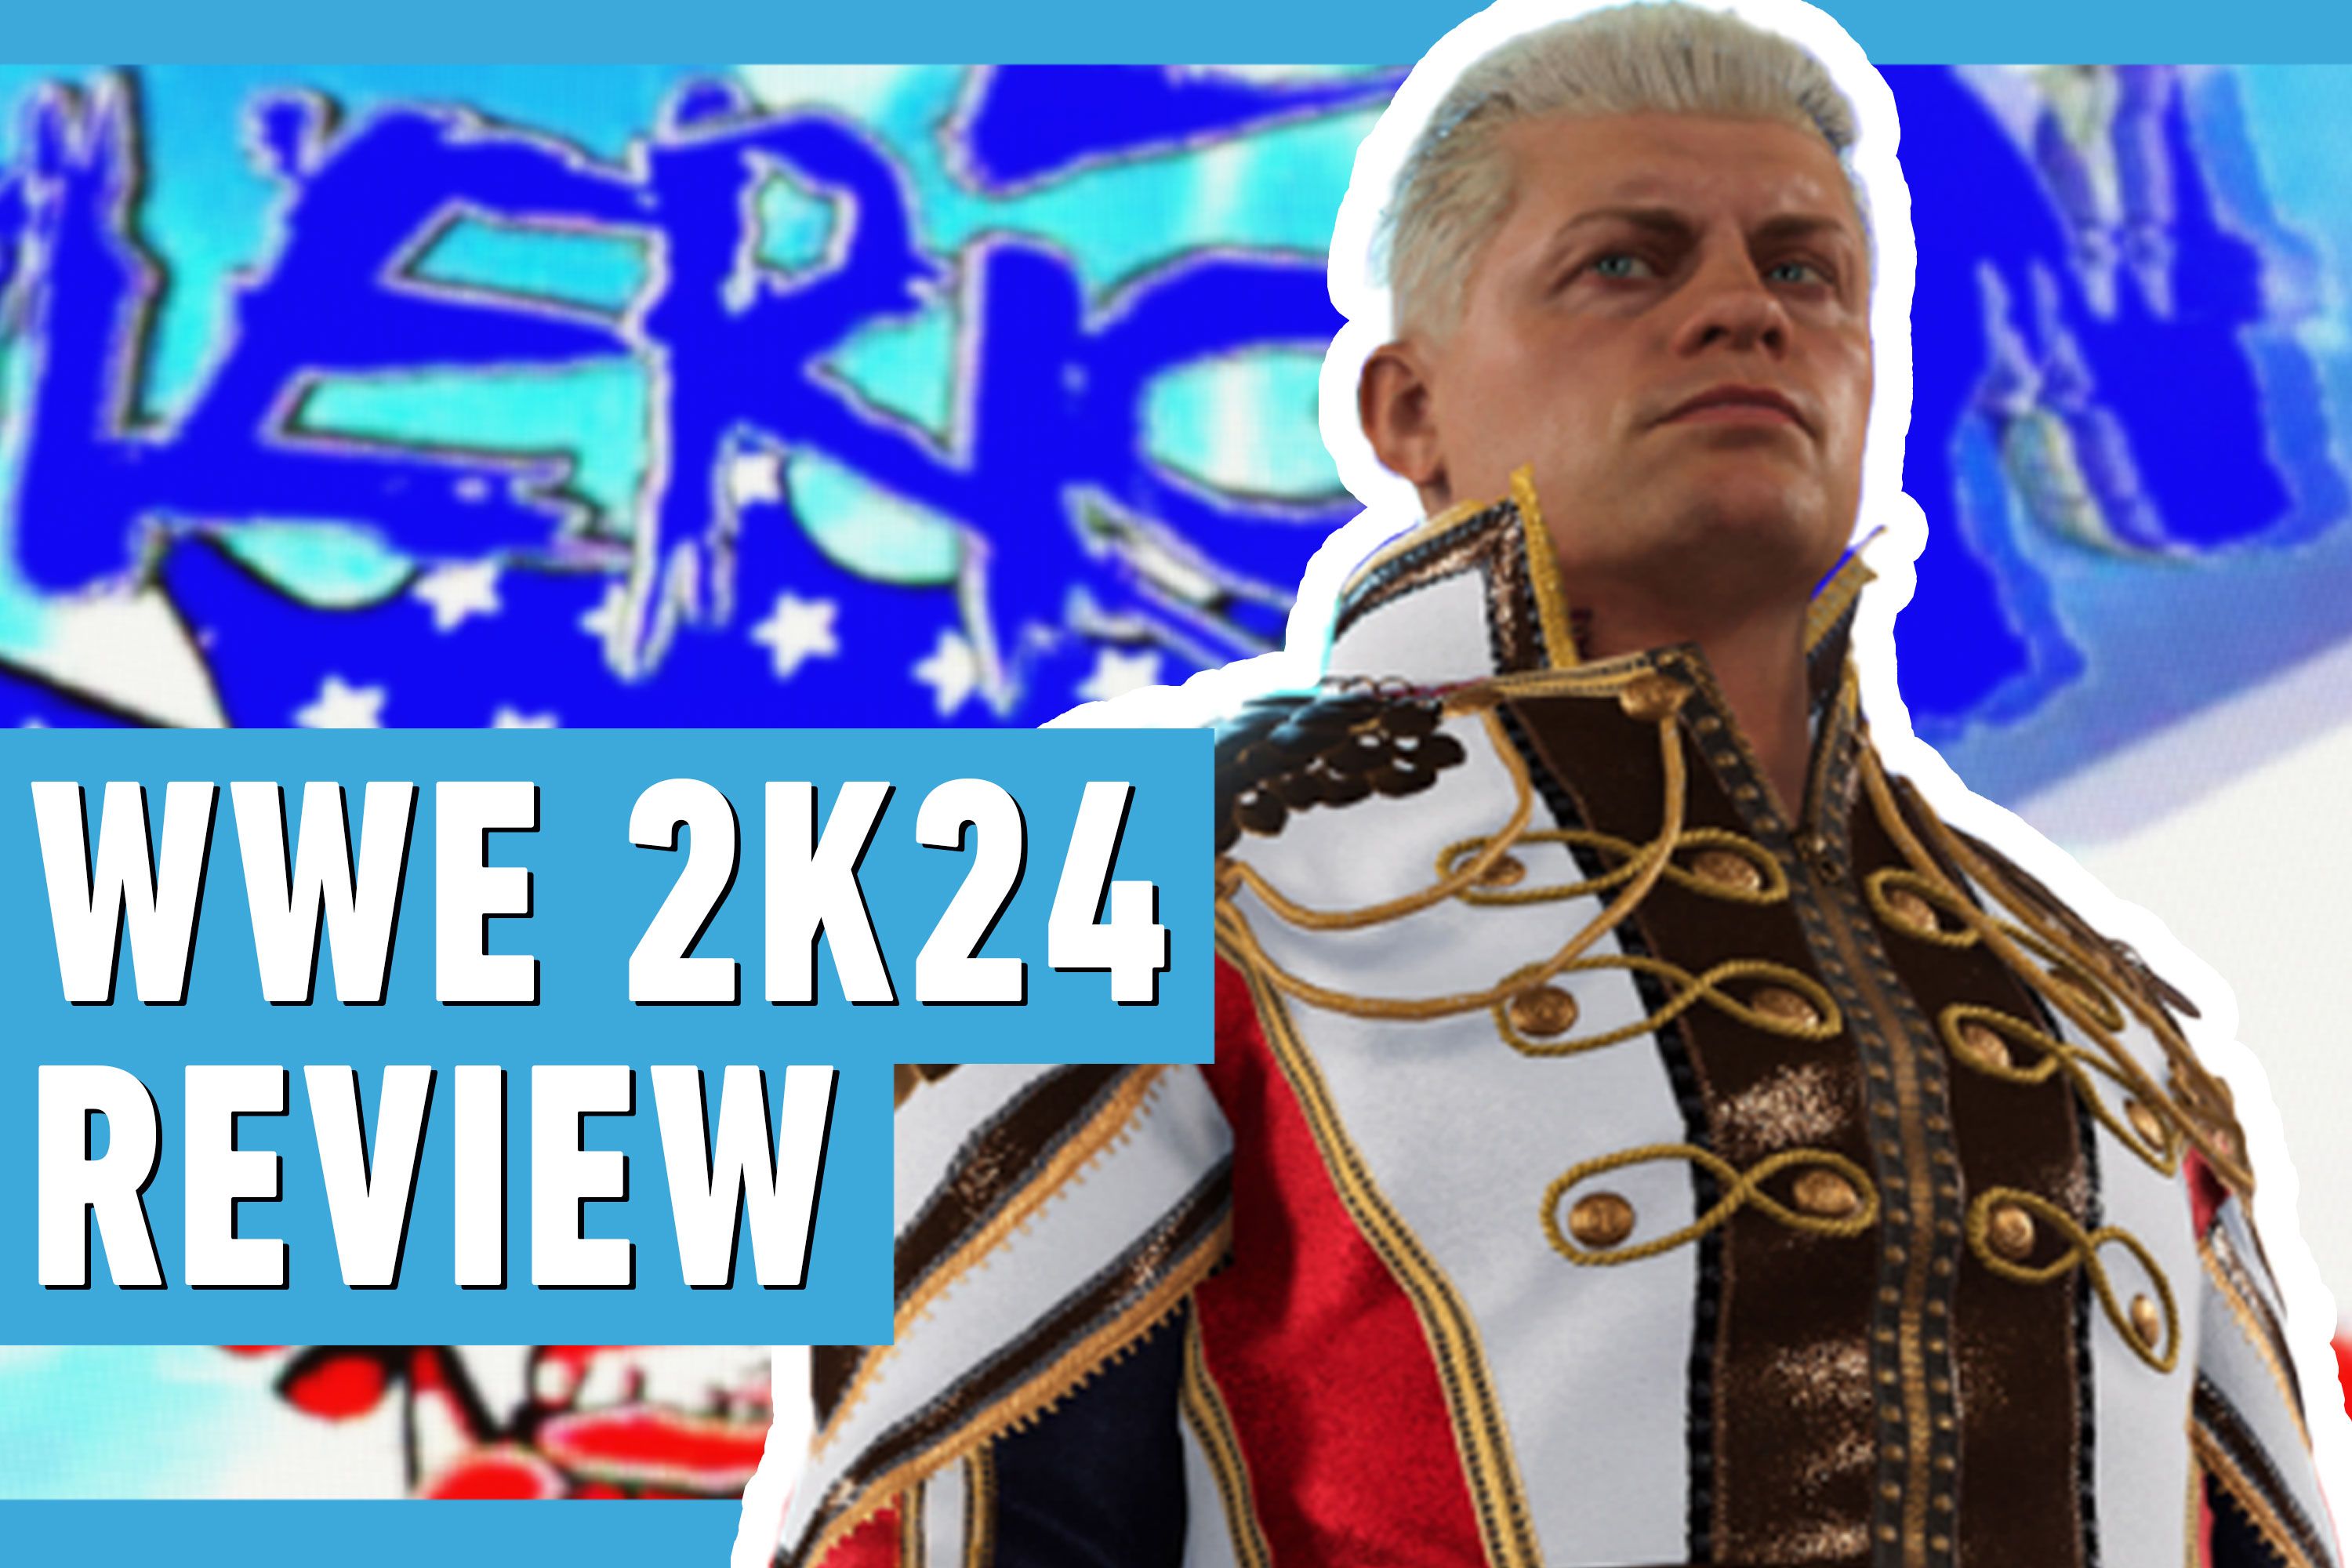 2k24-review-THUMB-SITE-2